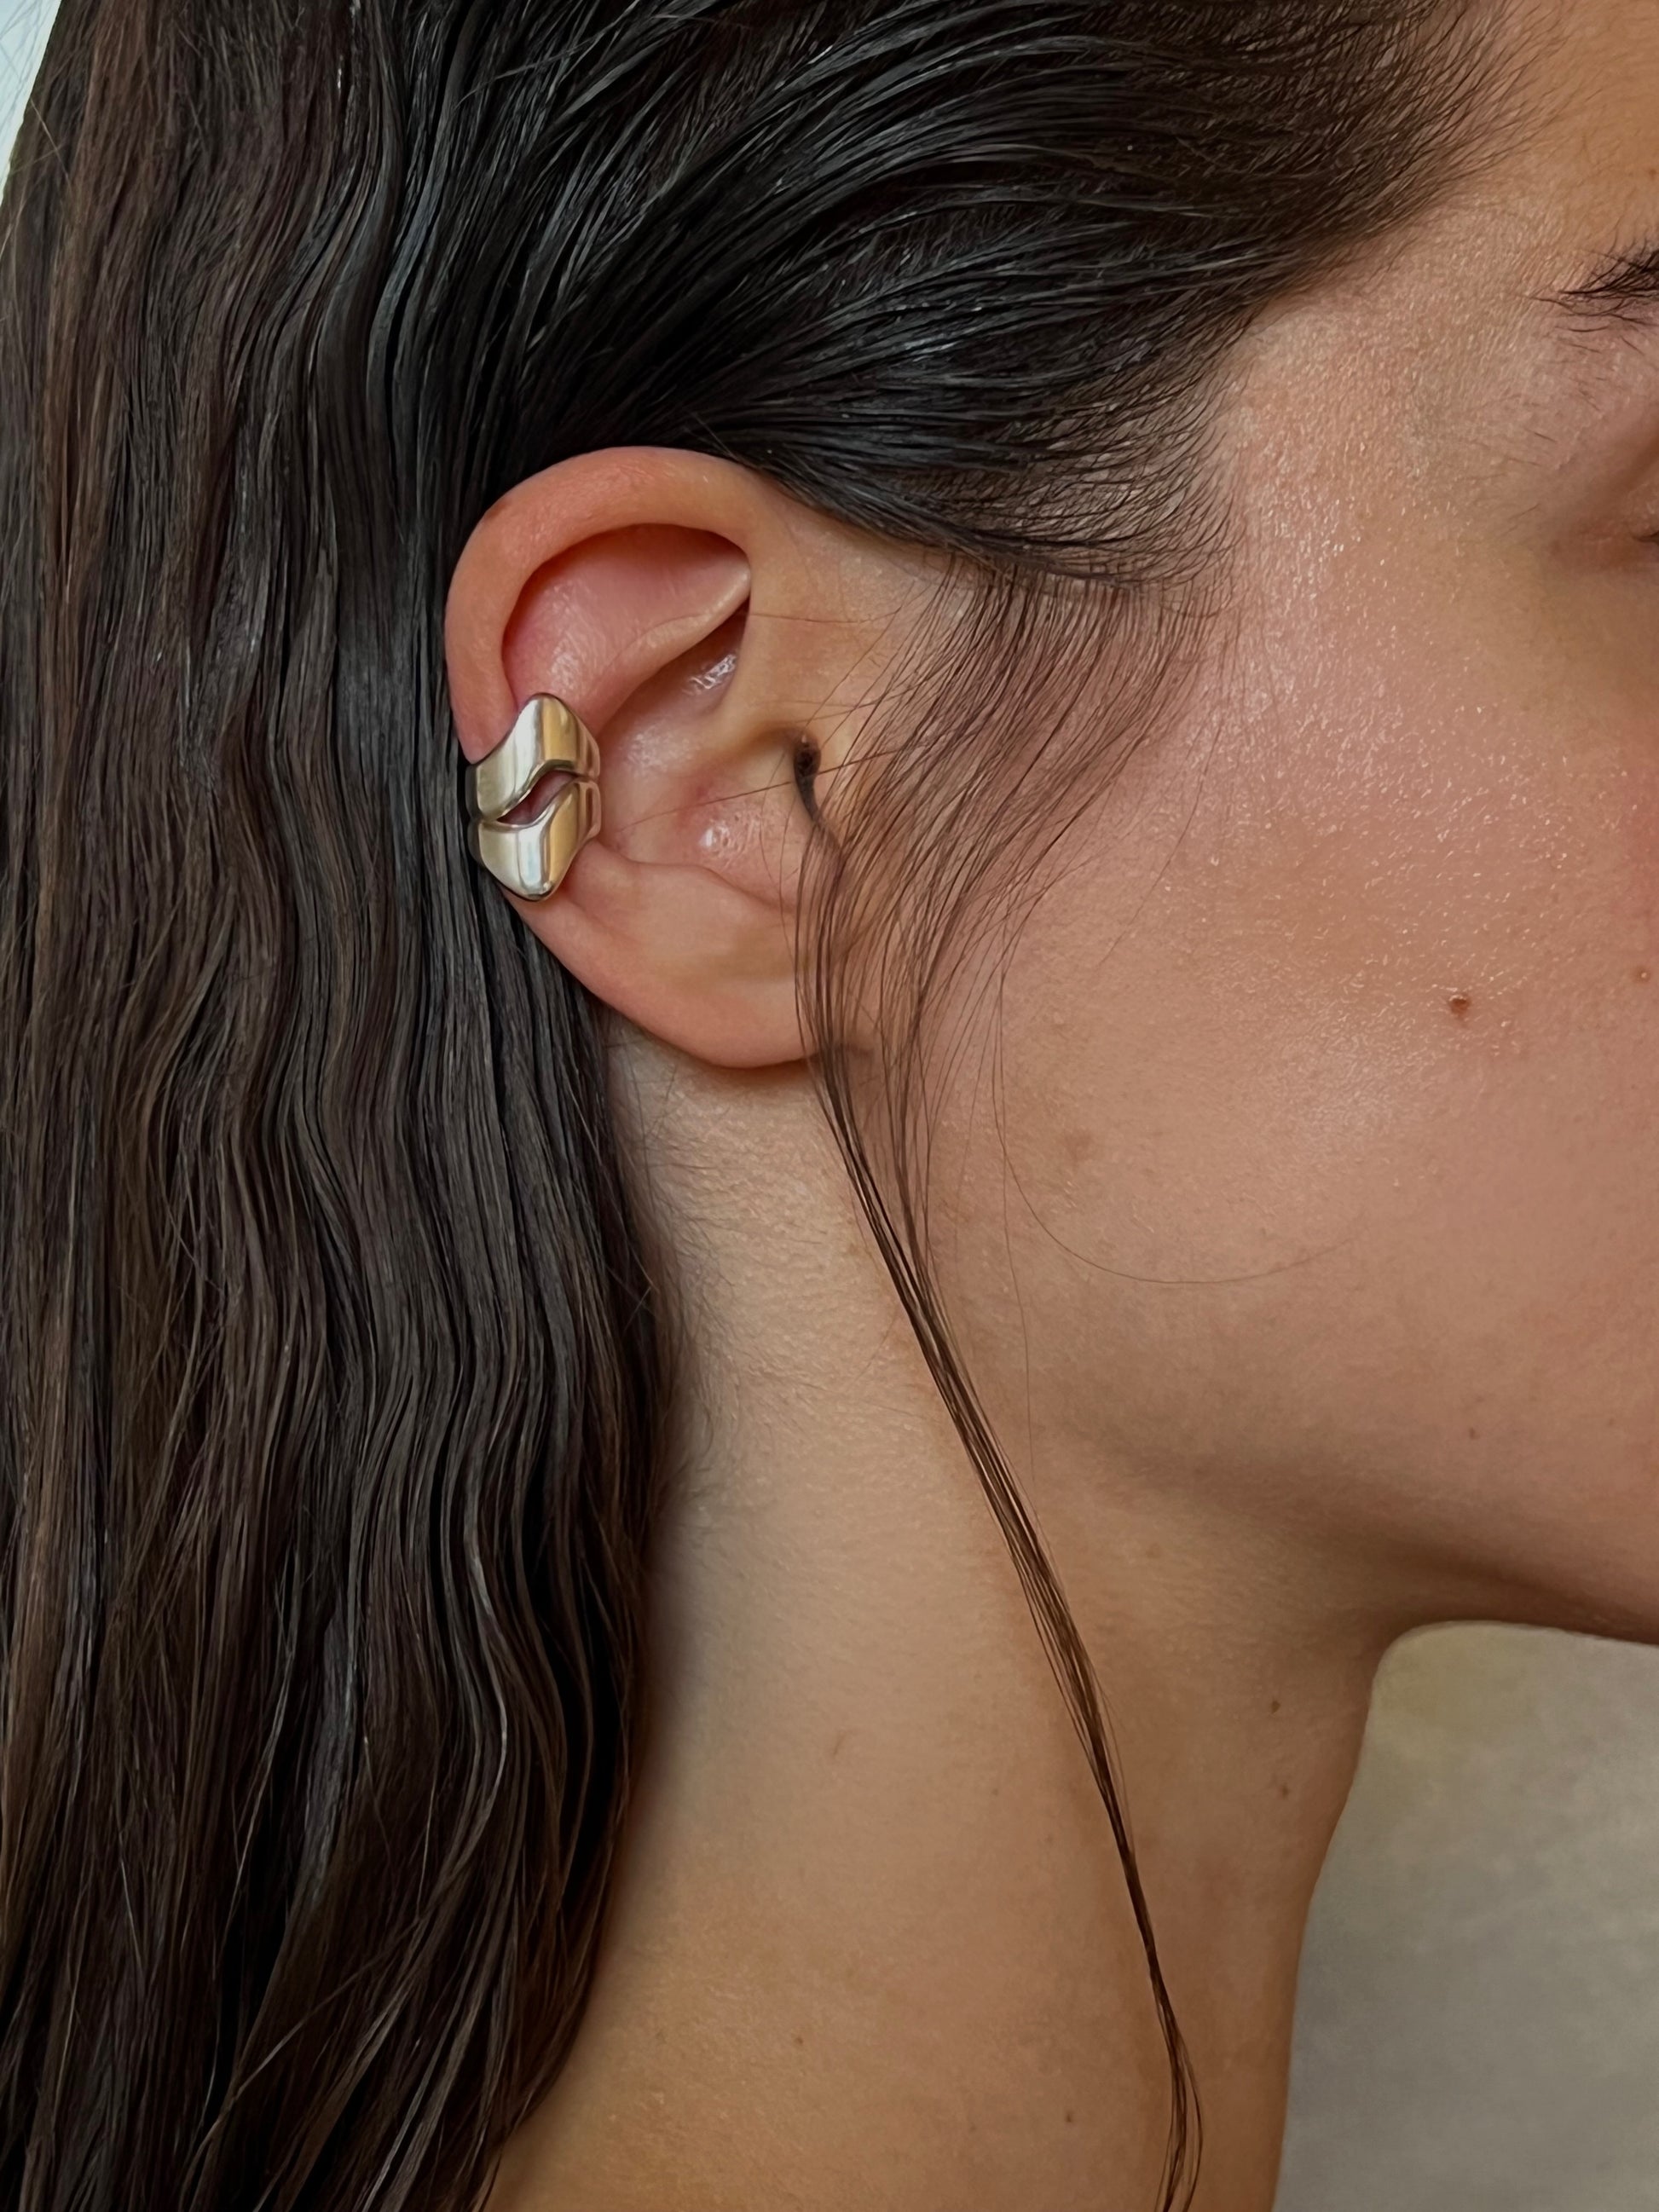 Gold jewelry called Earcuff made in Germany